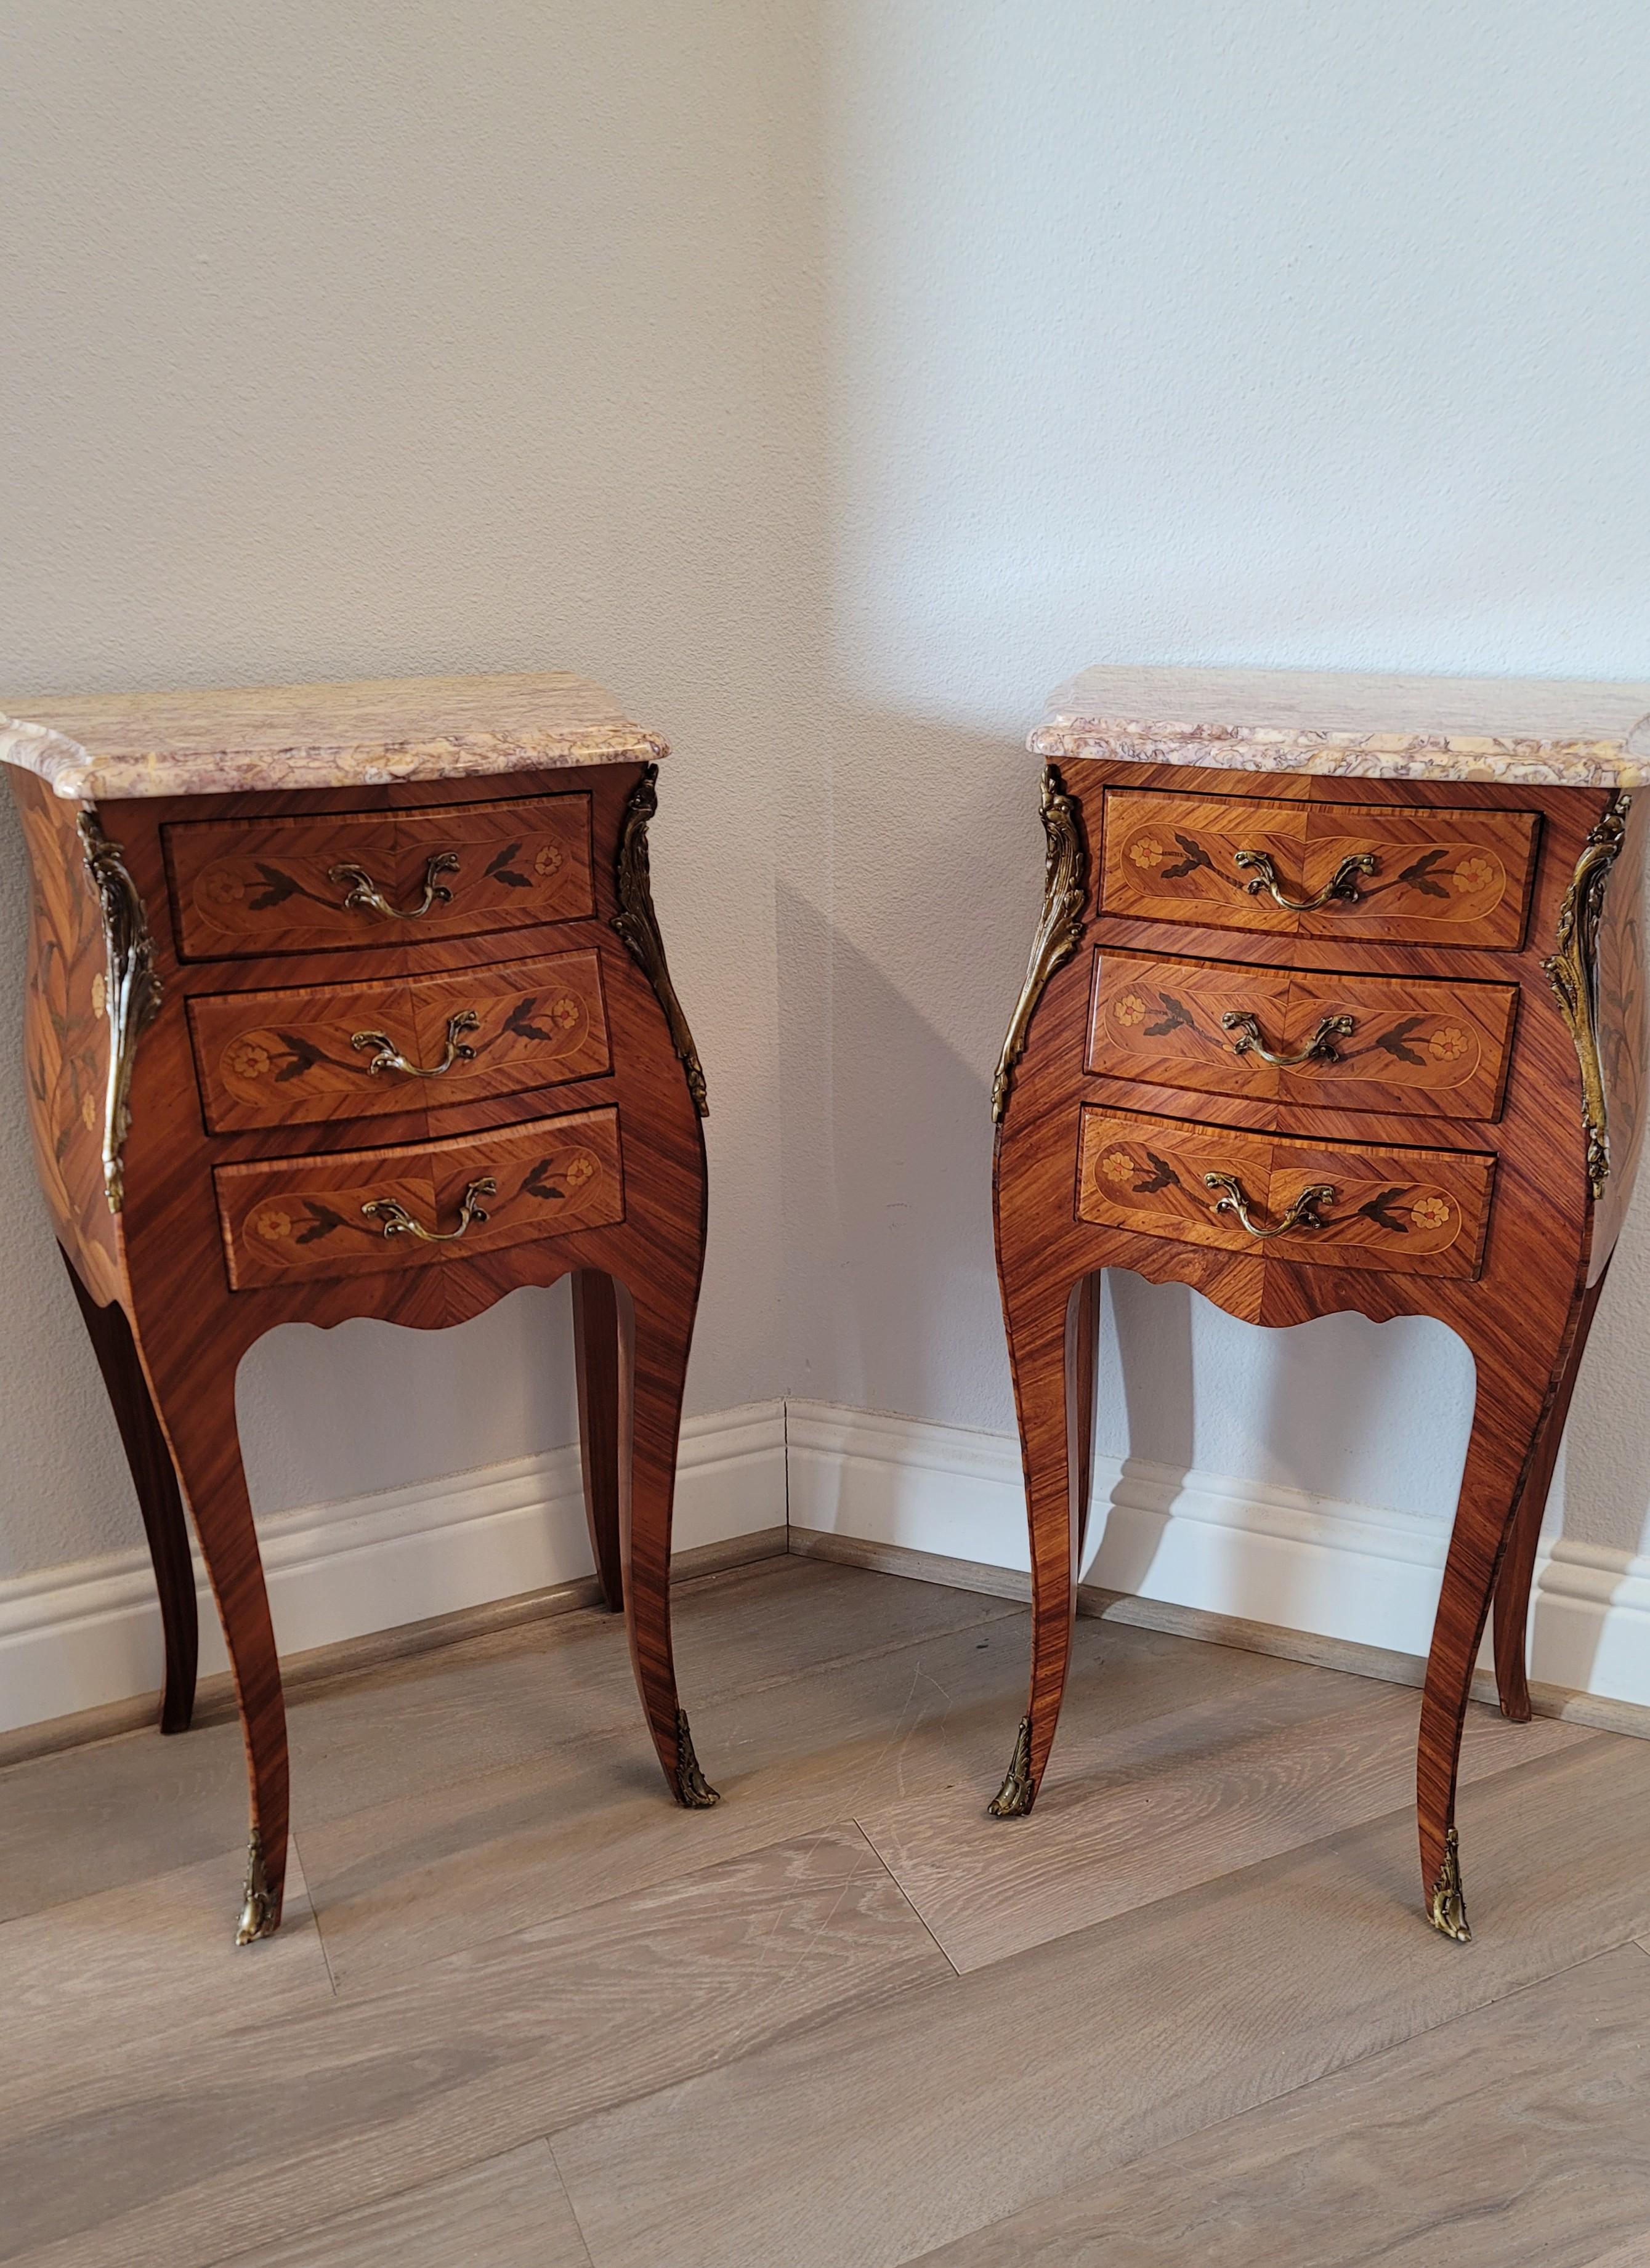 A pair of fine mid-century French Louis XV style brocatelle marble-top kingwood and mahogany bombe bedside cabinet nightstands - side tables.

Exquisitely hand-crafted in France, circa 1940s, high quality craftsmanship and construction, having a